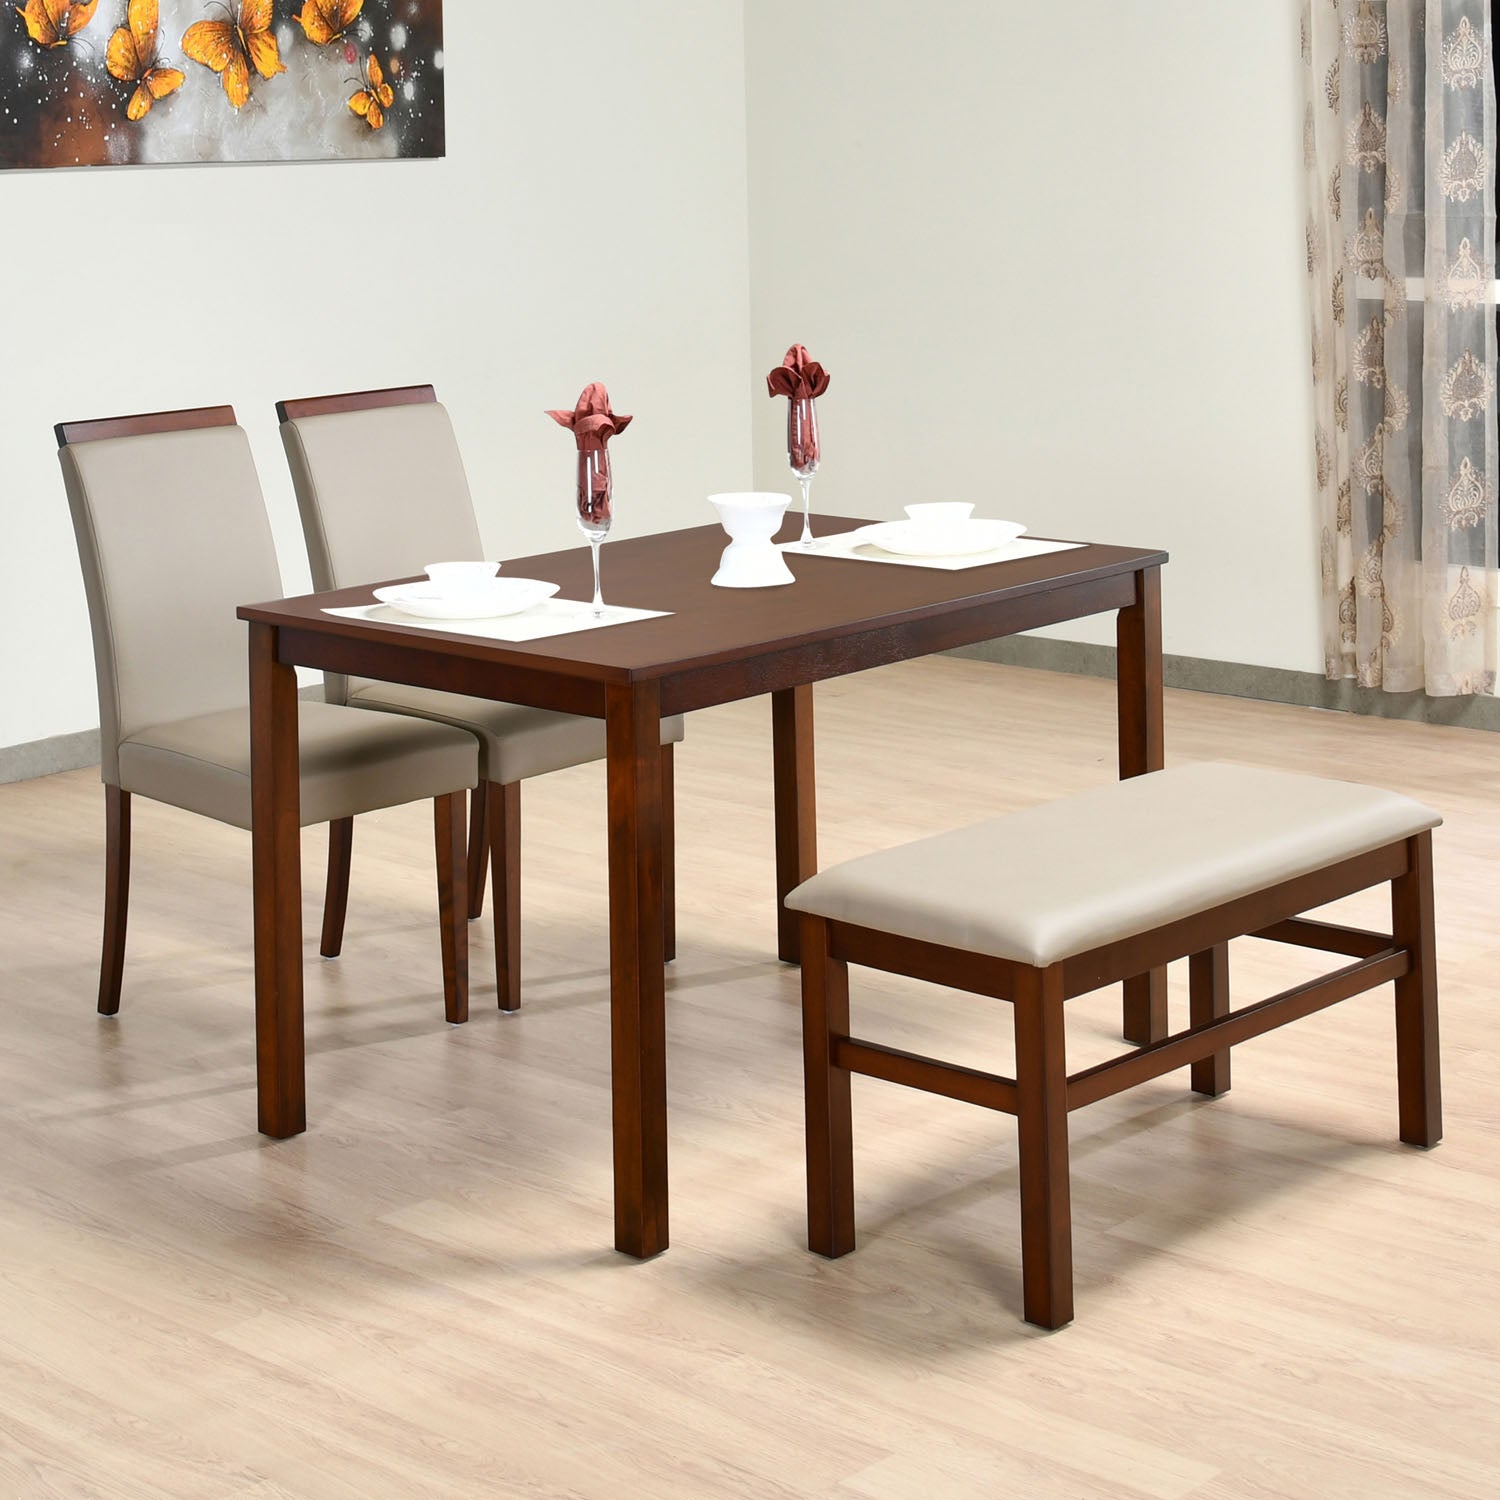 Pearl 4 Seater Dining Set With Bench (Cappucino)